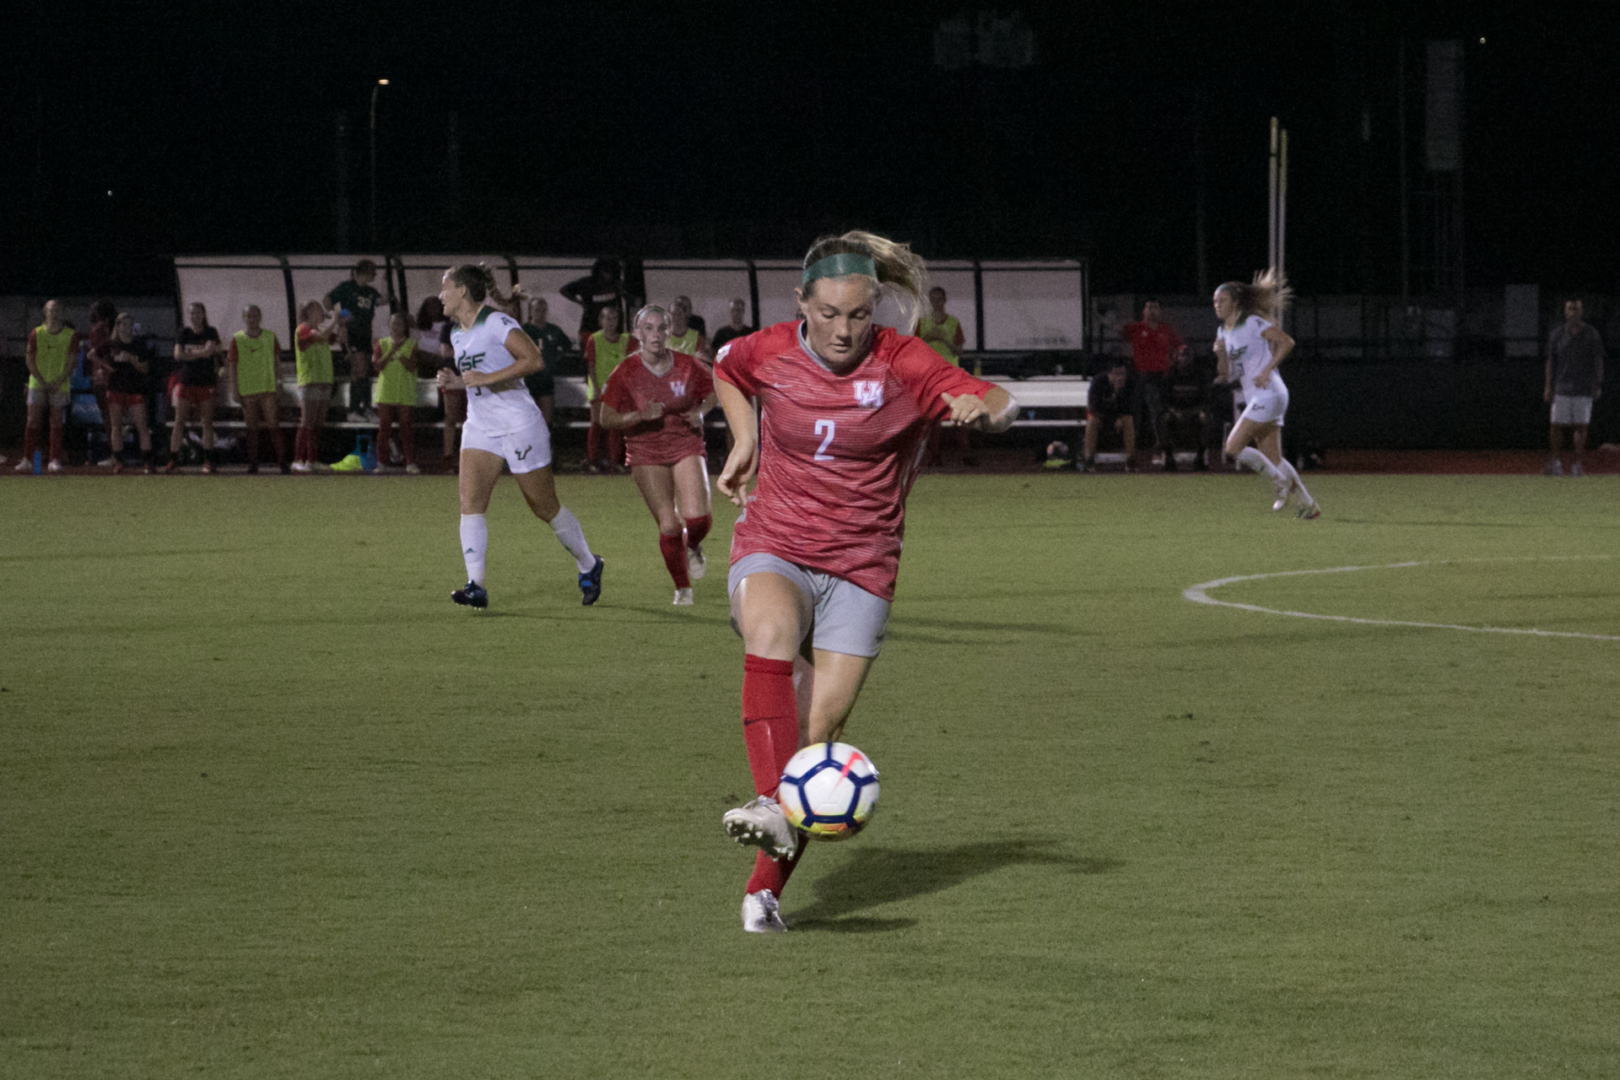 The Cougars lost to the USF Bulls 3-1 Thursday in their 2019 season opener. Houston was only able to get five shots on goal during the game compared to USF's 13 shots on goal. | Catt Lara/The Cougar